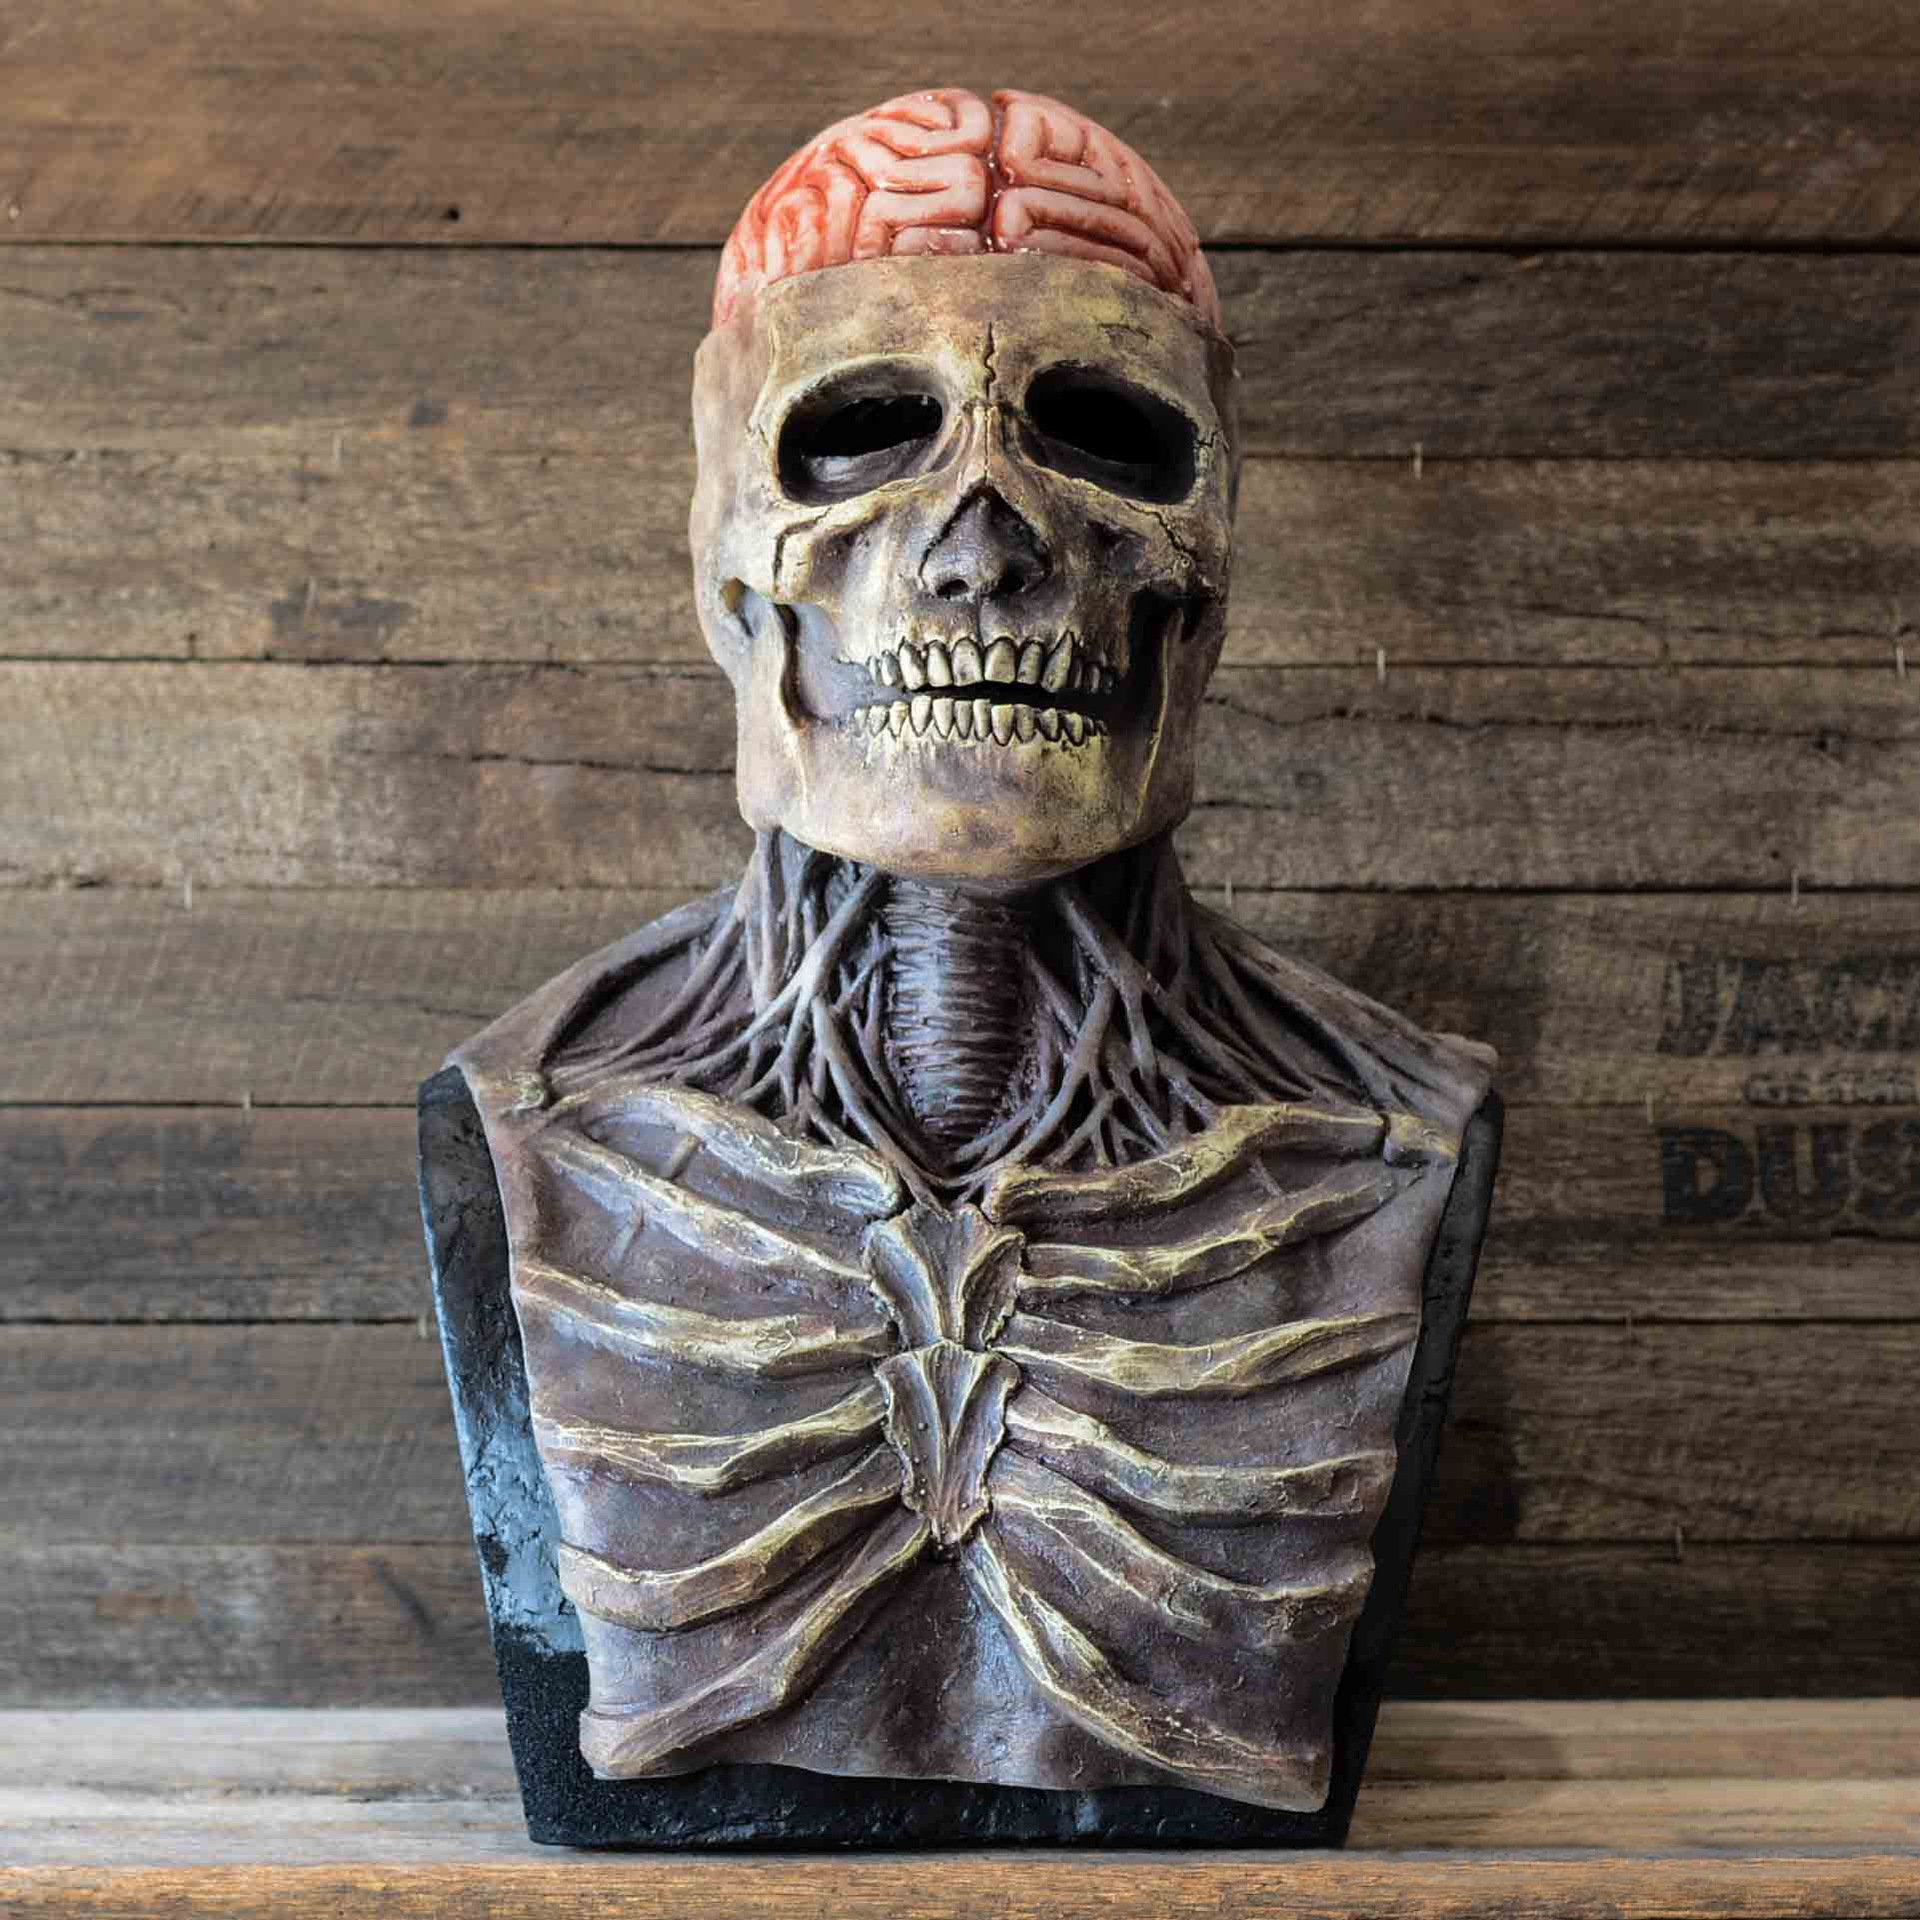 🎃49%OFF Early-Halloween Flash Sale💀The Latest Skeleton Biochemical Mask